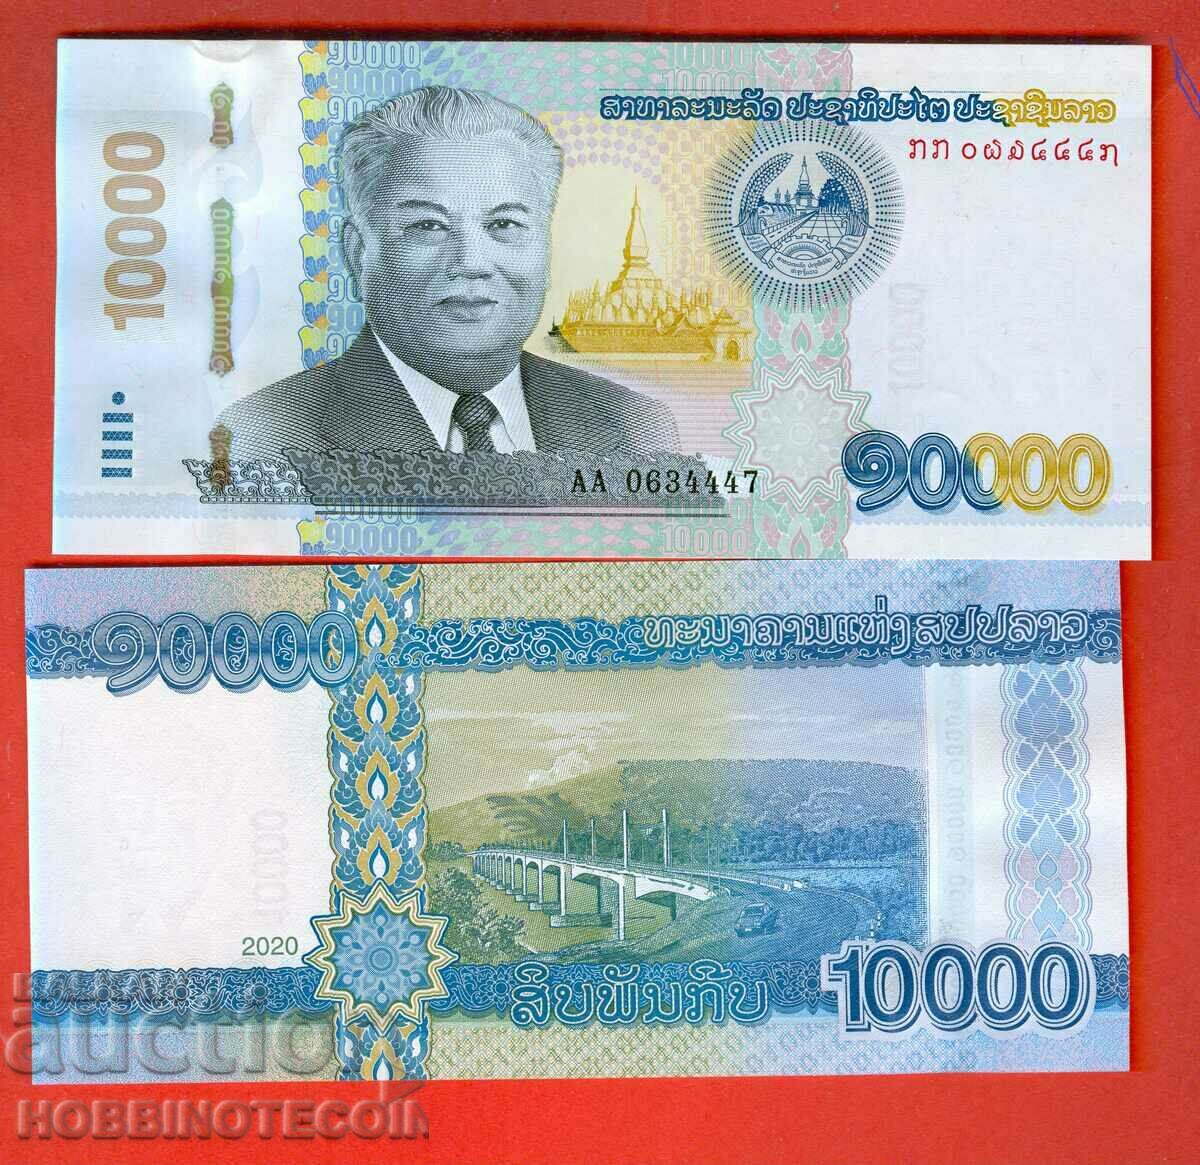 LAOS LAO 10000 10,000 Kip issue issue 2020 2022 NEW UNC